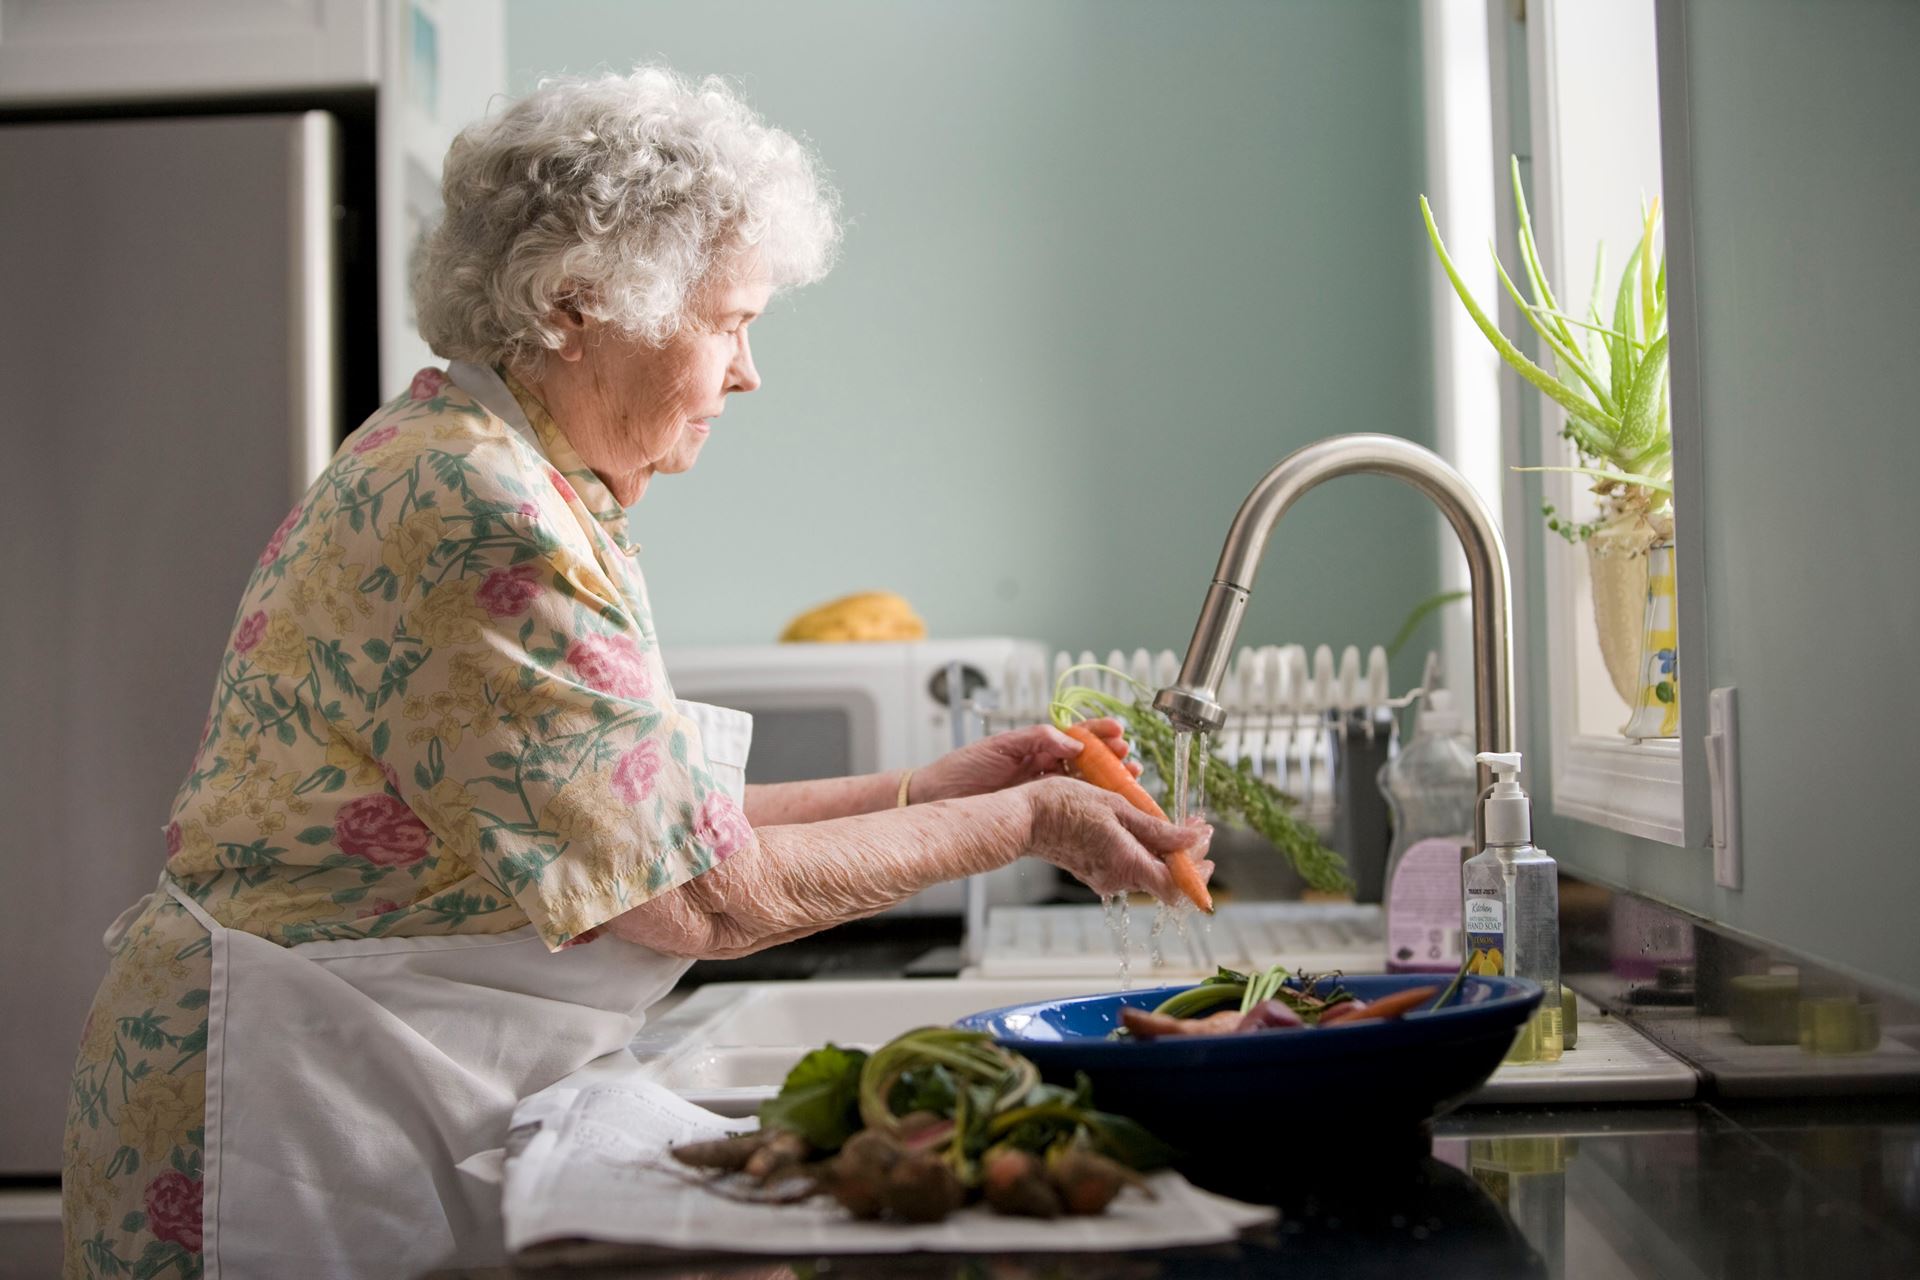 An elderly woman washing vegetables at a sink